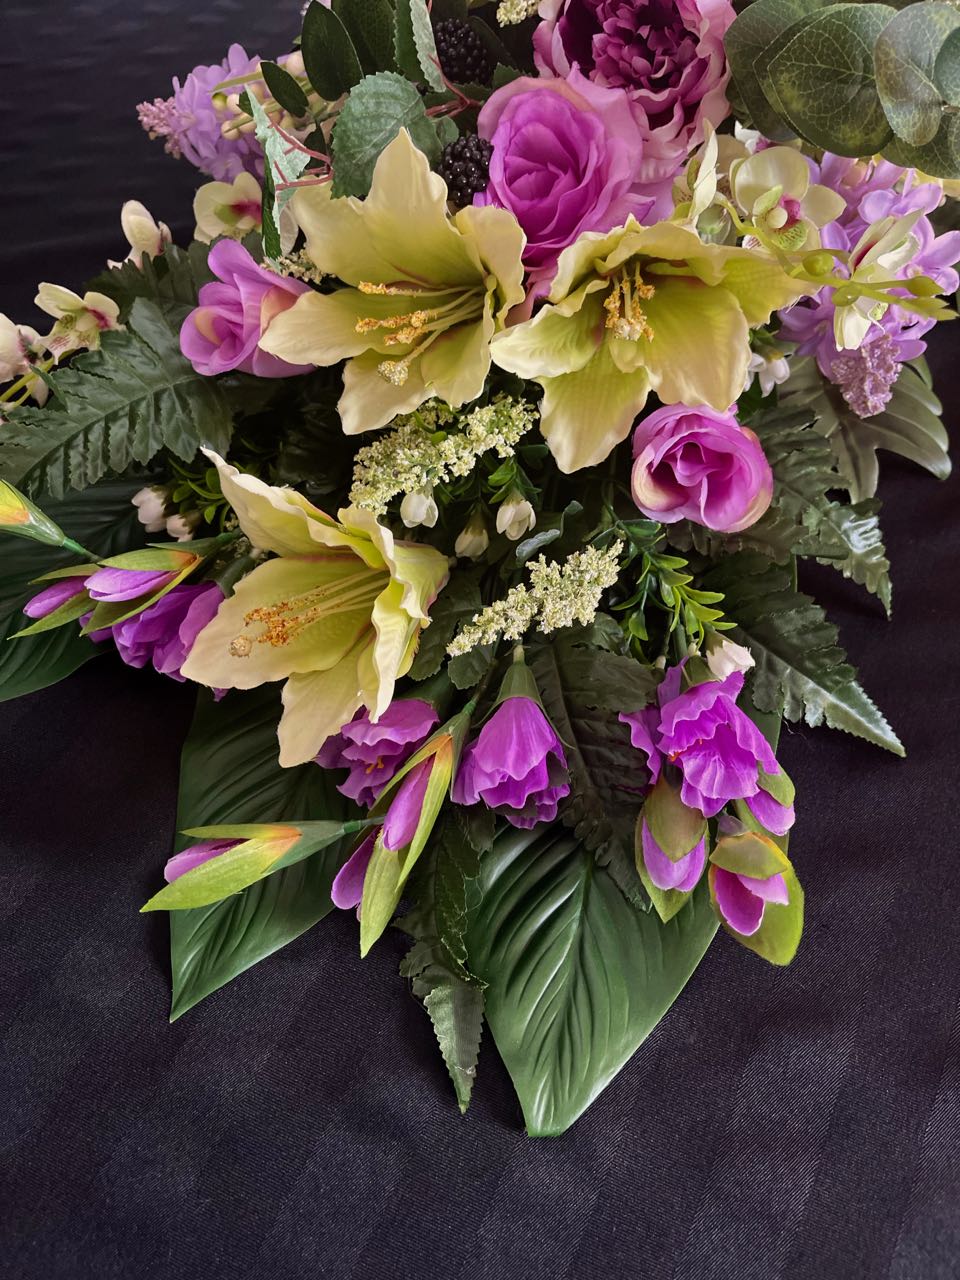 Indulge in the lushness of this vibrant floral arrangement. Deep purple and delicate mauve roses are artfully paired with subtly light lime green lilacs. Majestic purple peonies, pom pom dahlias, orchids, and lilies coalesce to create a stunning vision. Enjoy the unexpected accent of blackberries popping out of the flowers to add visual interest. This design measures four feet long and 16 inches wide, elevated upon glossy hunter green palm leaves.